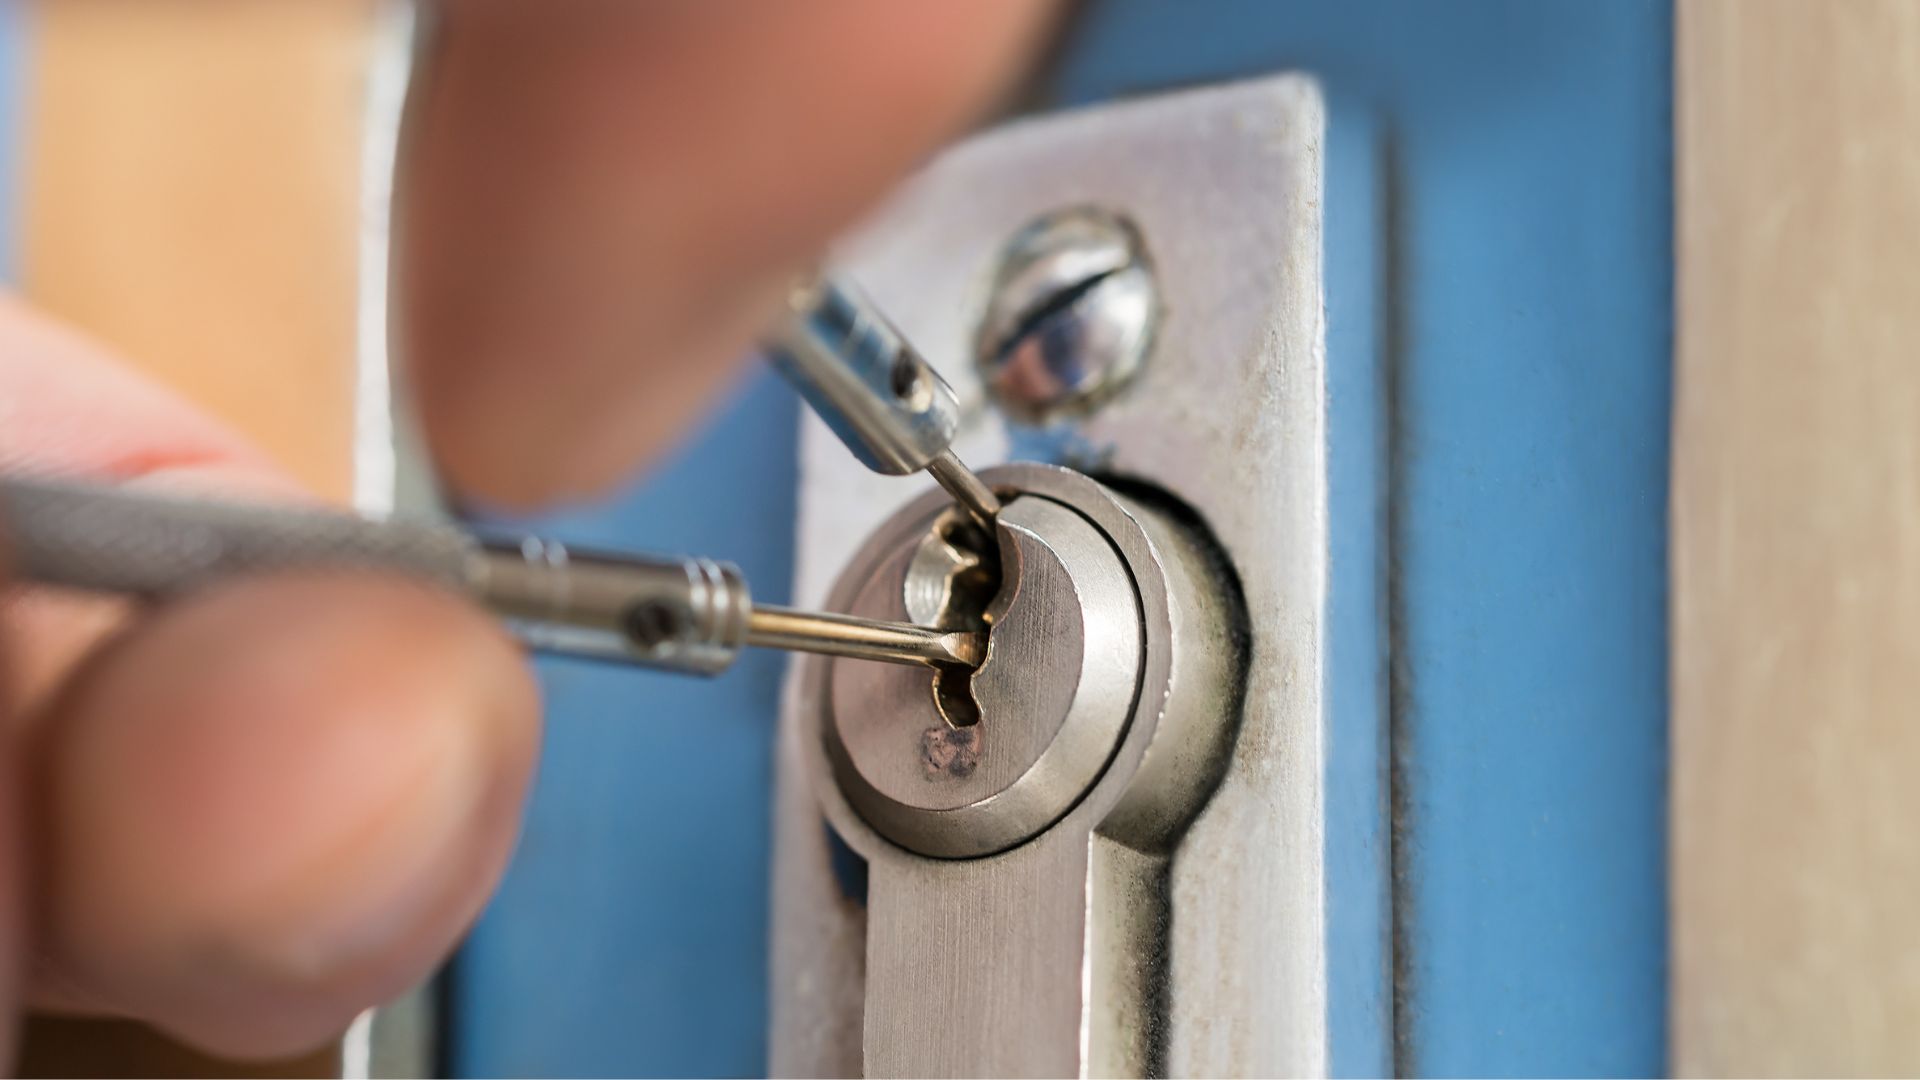 Is Lock Picking As Easy as the Movies Make It?